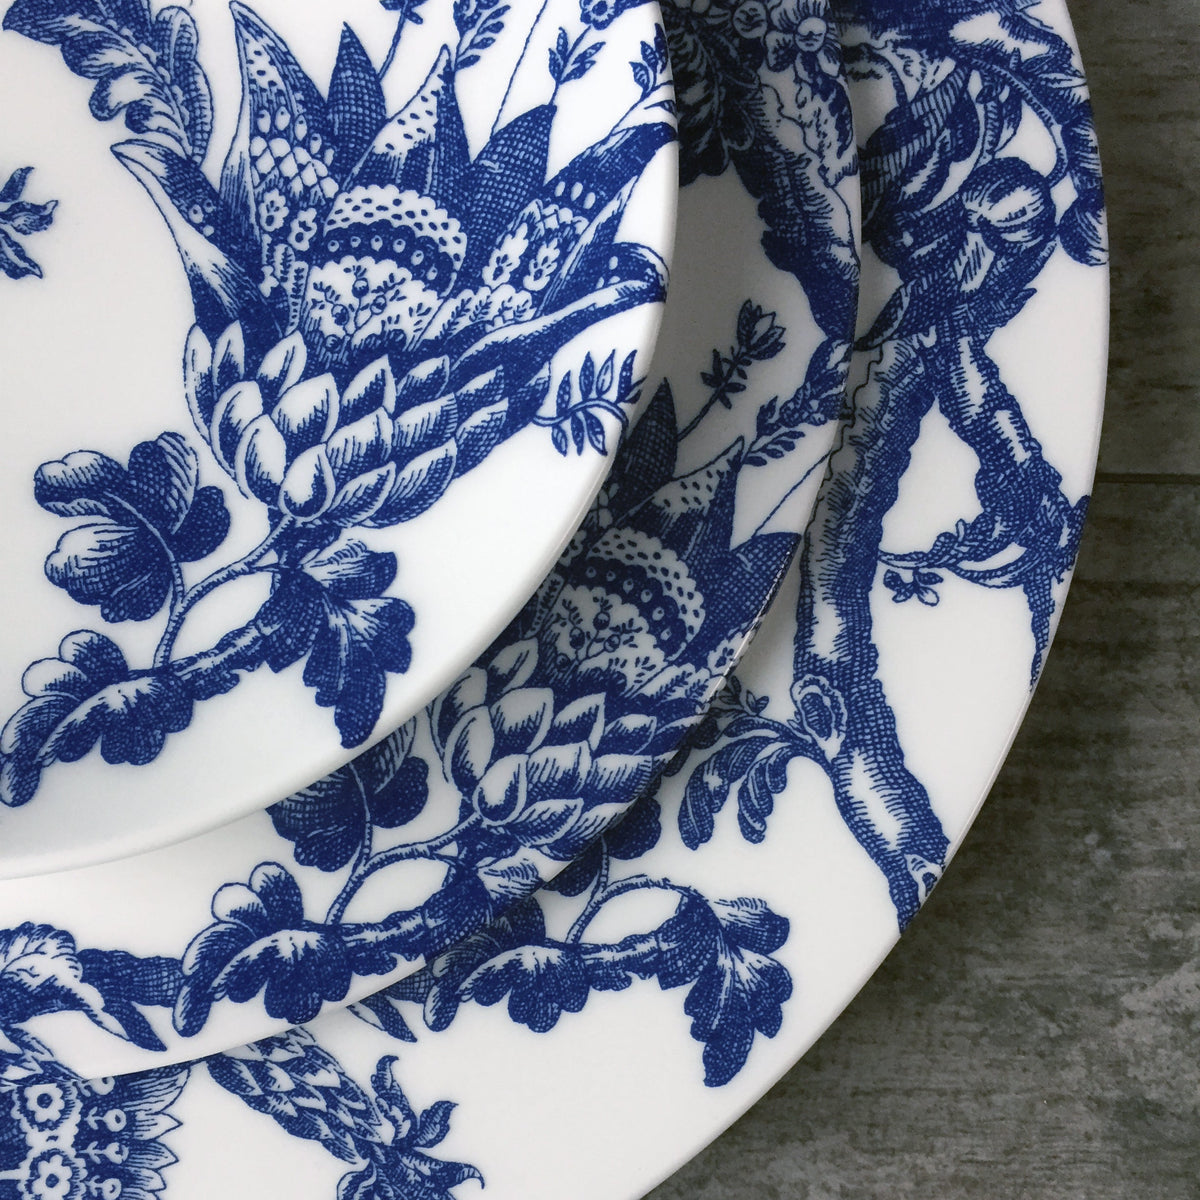 Close-up of three stacked Arcadia Small Plates by Caskata Artisanal Home with intricate blue floral patterns against a gray textured surface. Dishwasher and microwave safe, these heirloom-quality pieces add elegance to any table setting.